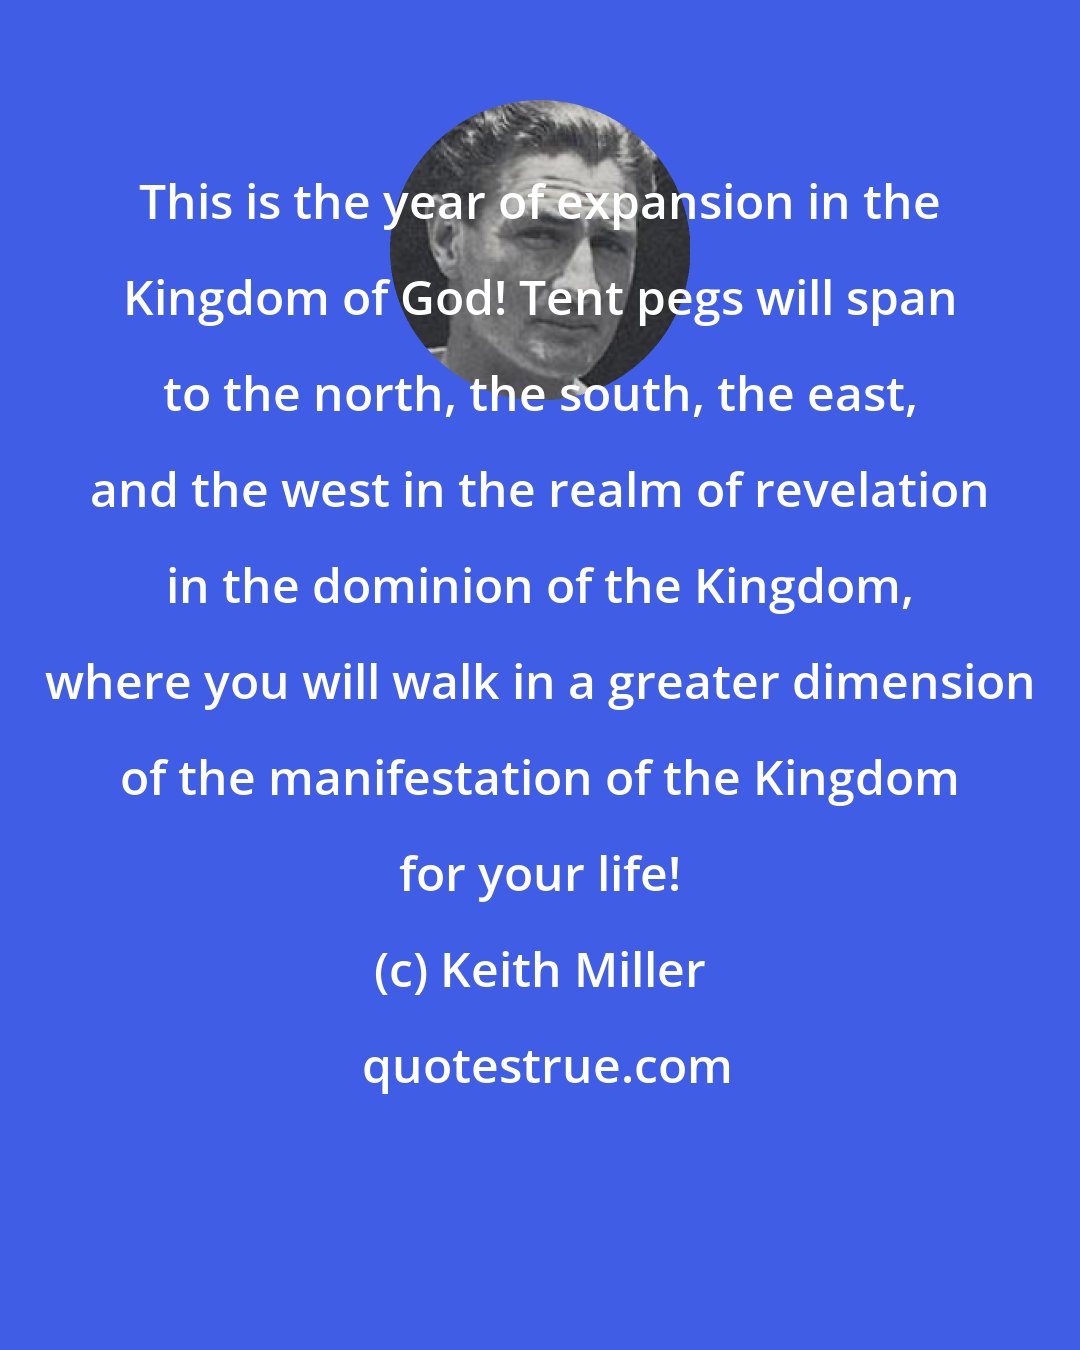 Keith Miller: This is the year of expansion in the Kingdom of God! Tent pegs will span to the north, the south, the east, and the west in the realm of revelation in the dominion of the Kingdom, where you will walk in a greater dimension of the manifestation of the Kingdom for your life!